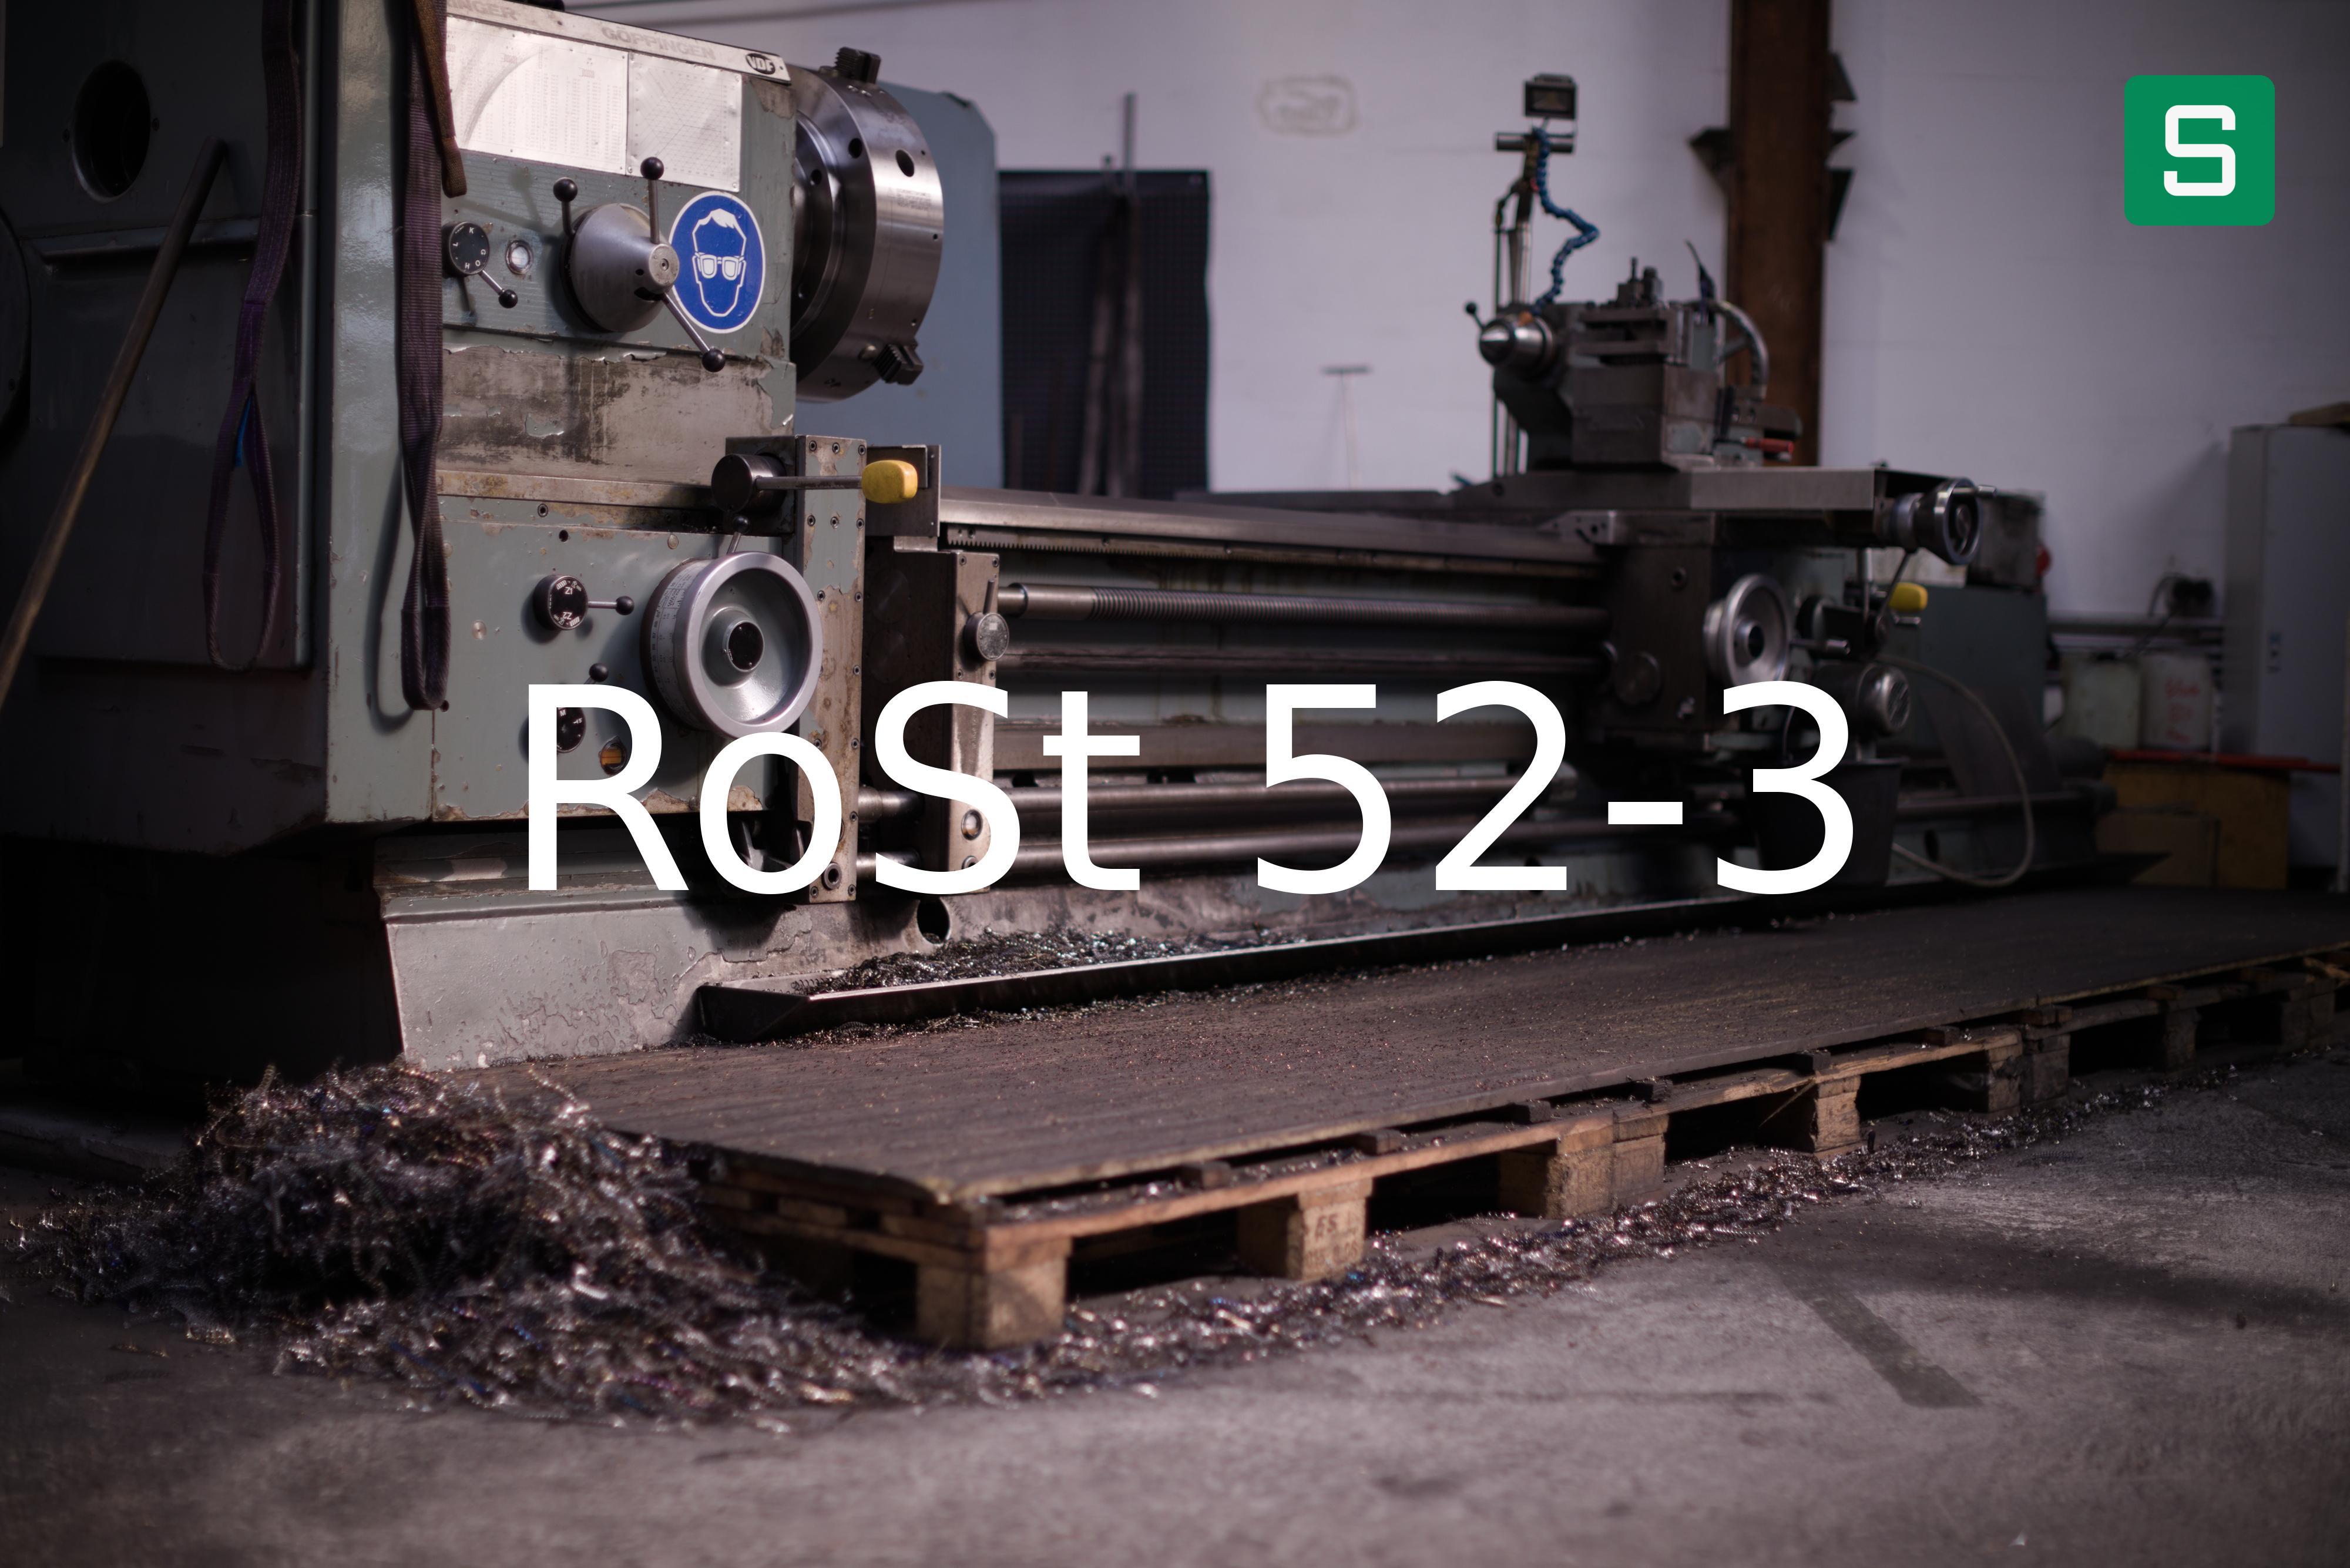 Steel Material: RoSt 52-3